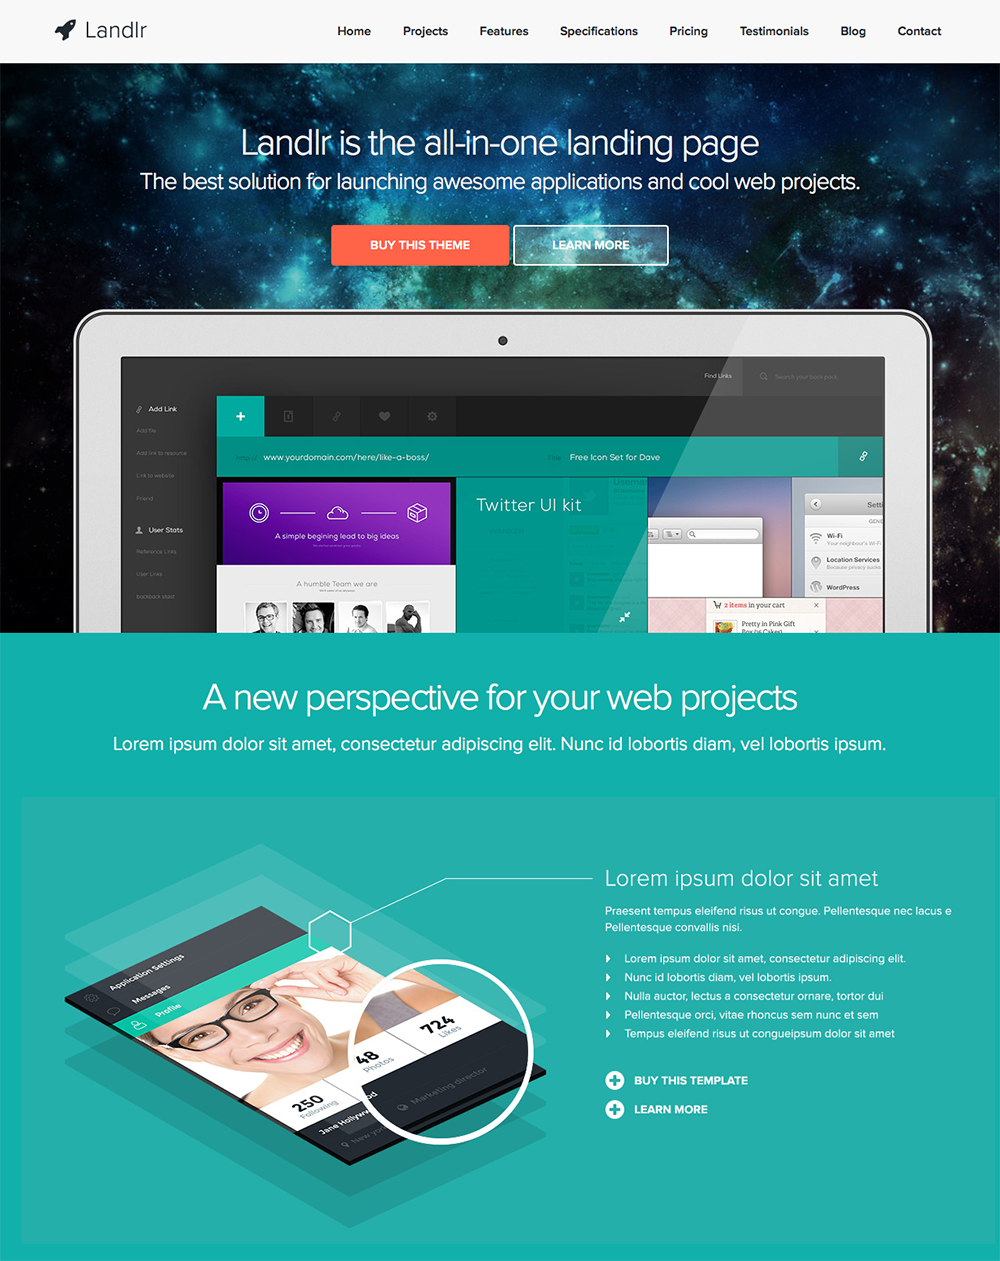 Landlr – The All-in-One Landing Page